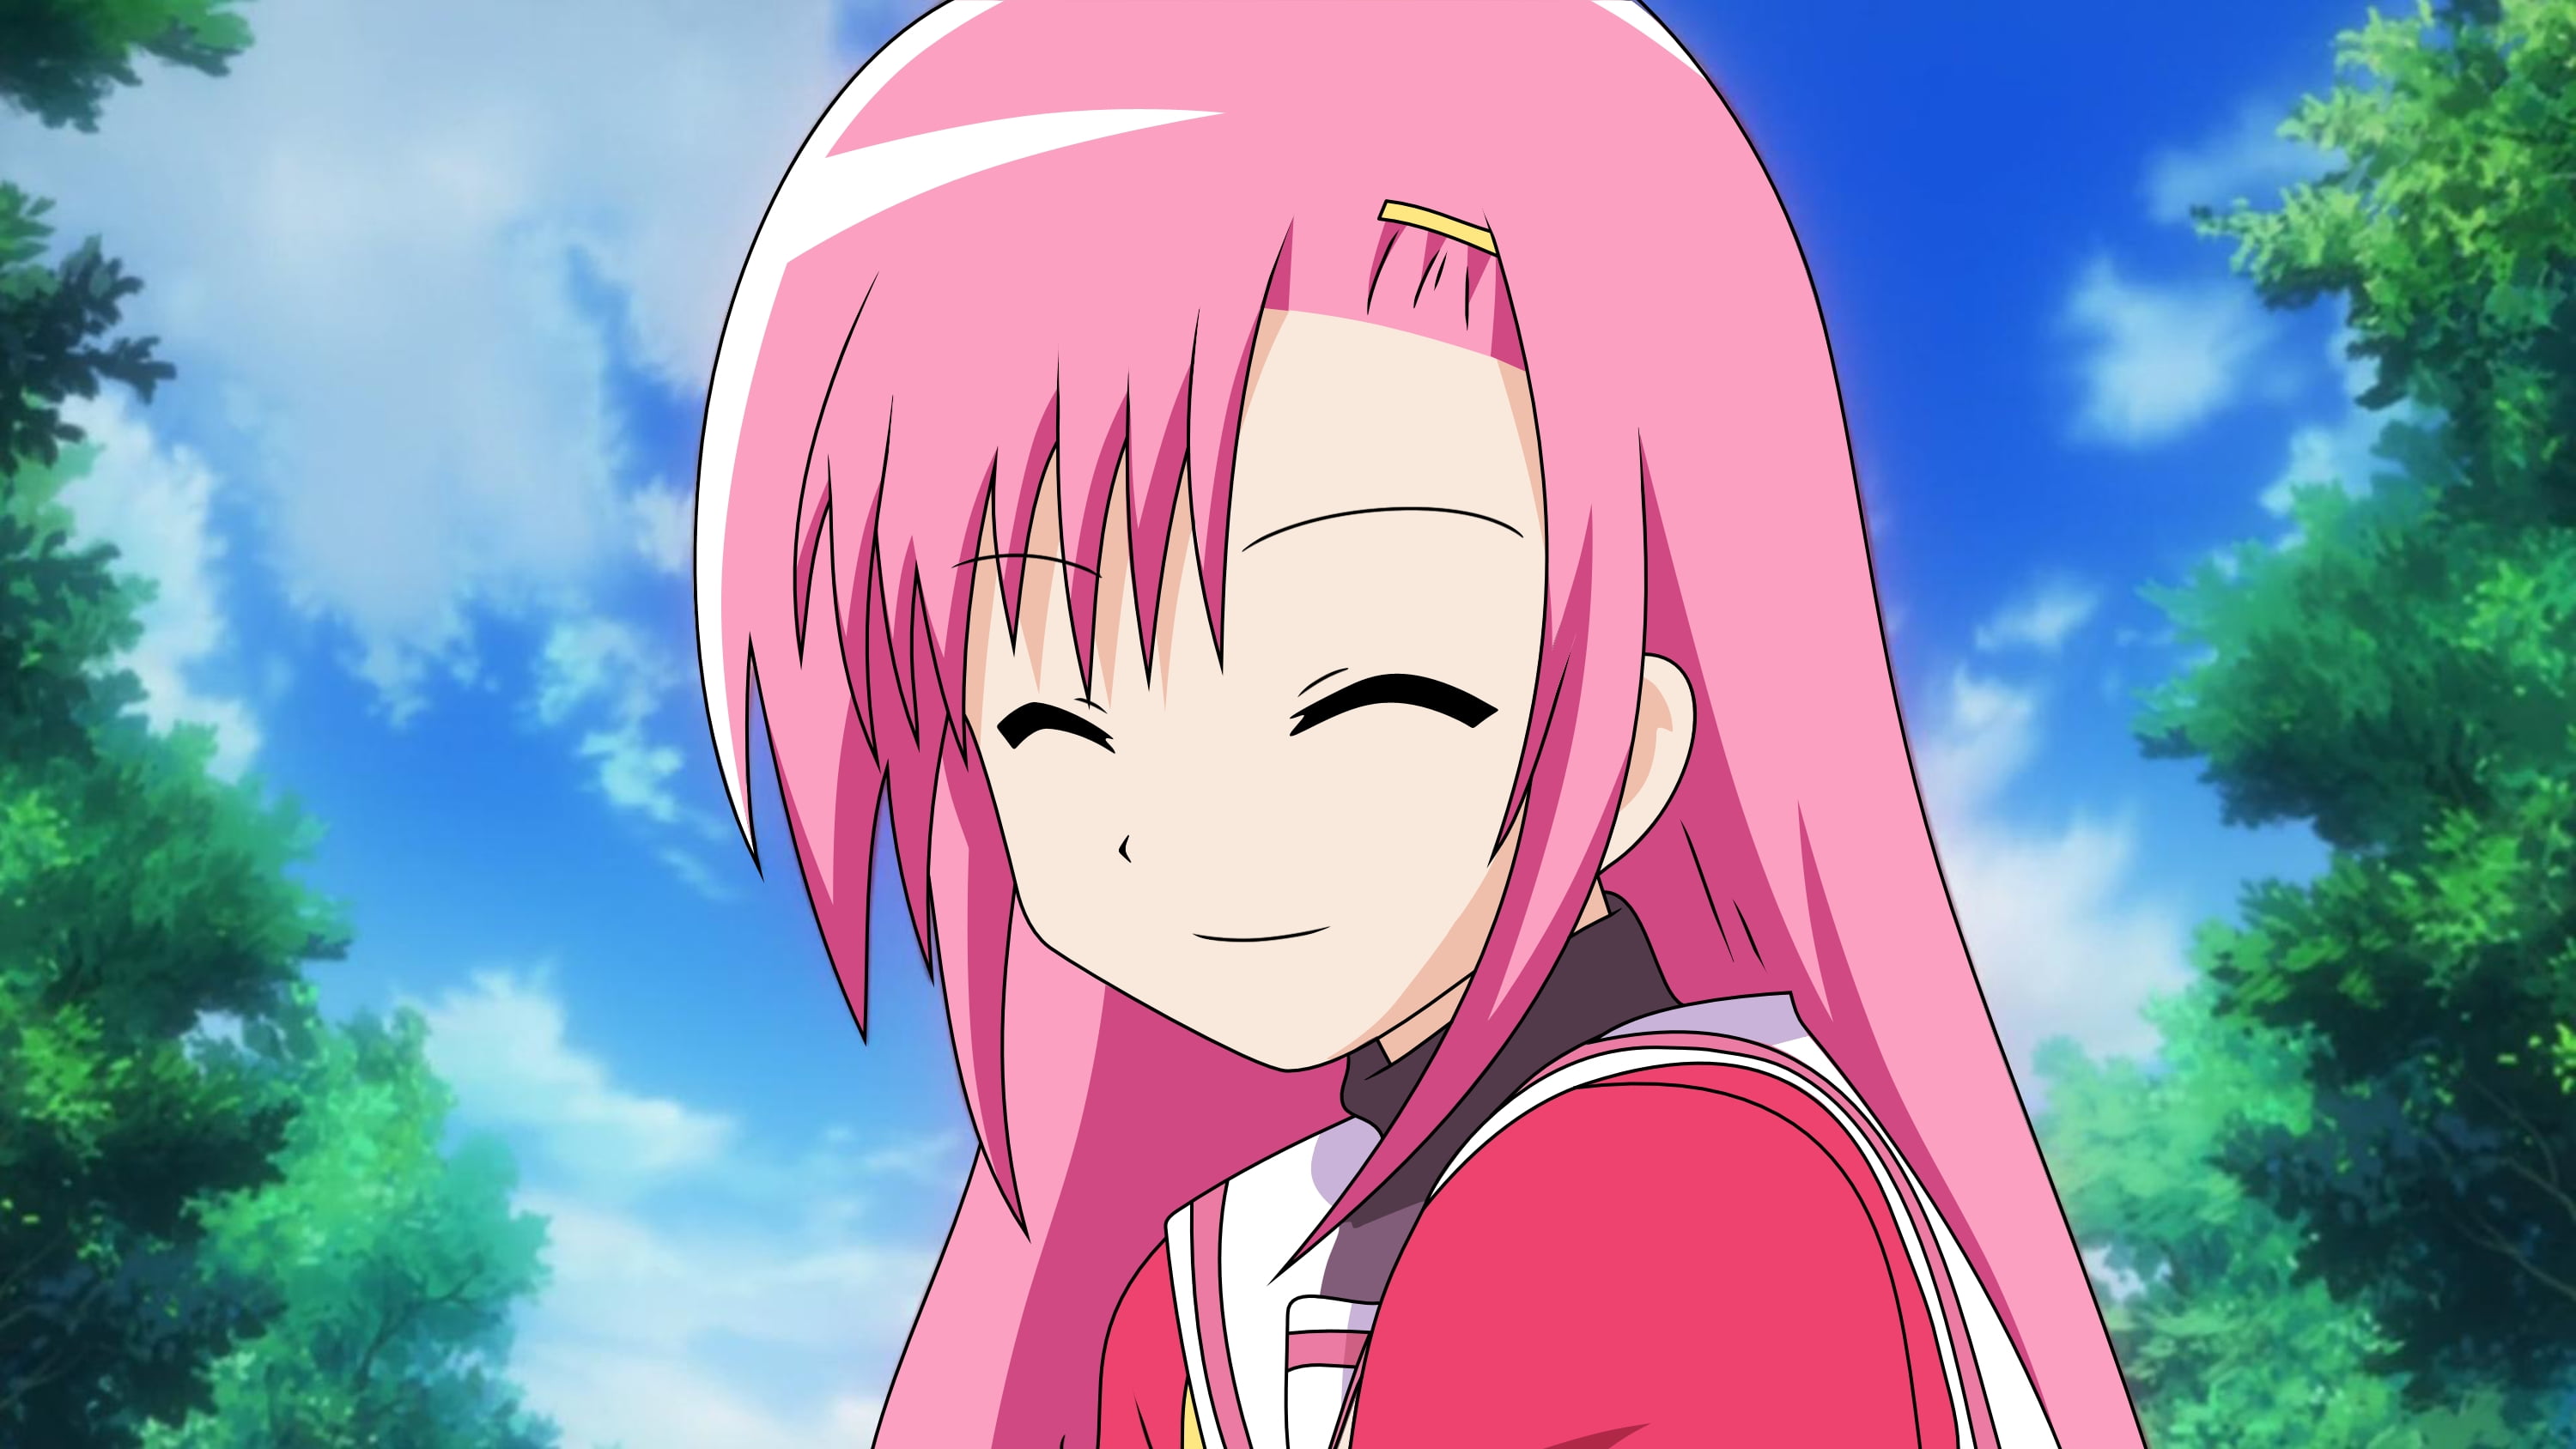 animated female character with pink hair smiling